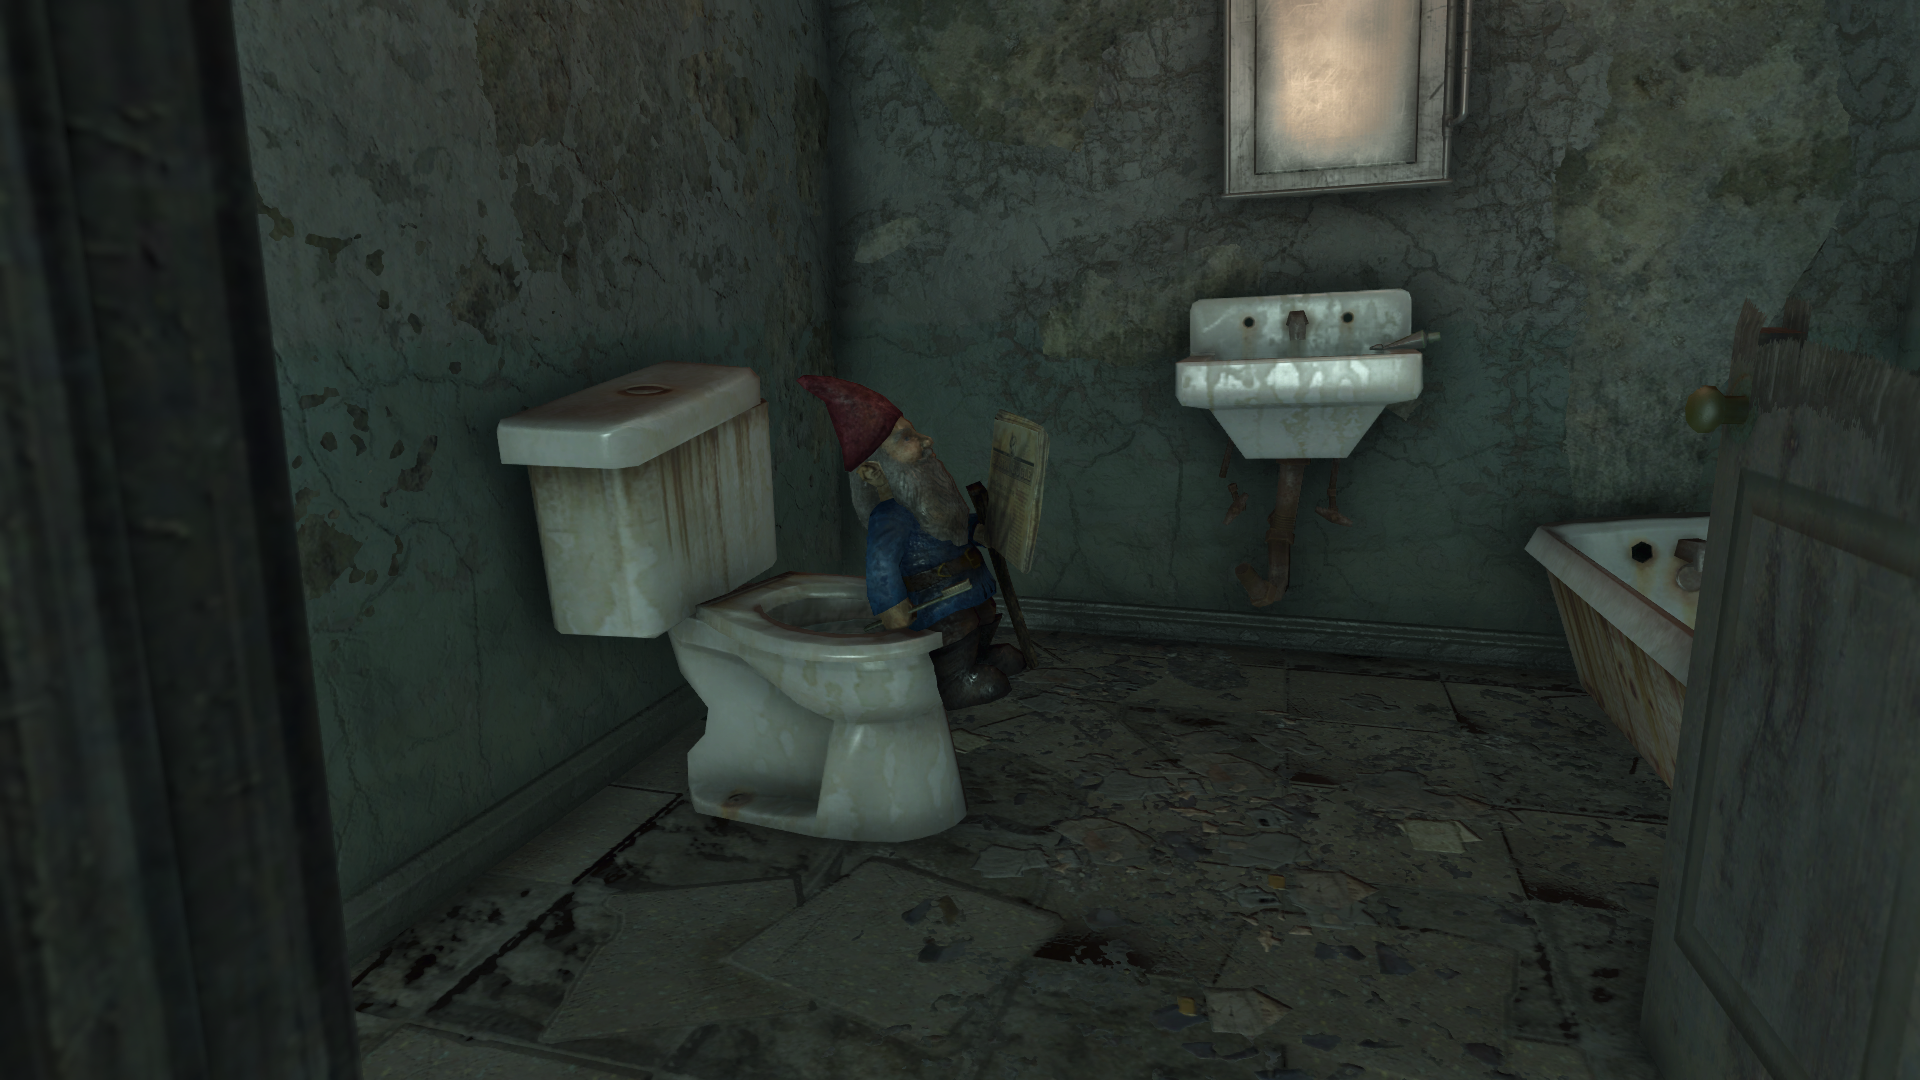 General 1920x1080 Fallout Fallout 4 dwarf toilets humor screen shot video games Bethesda Softworks